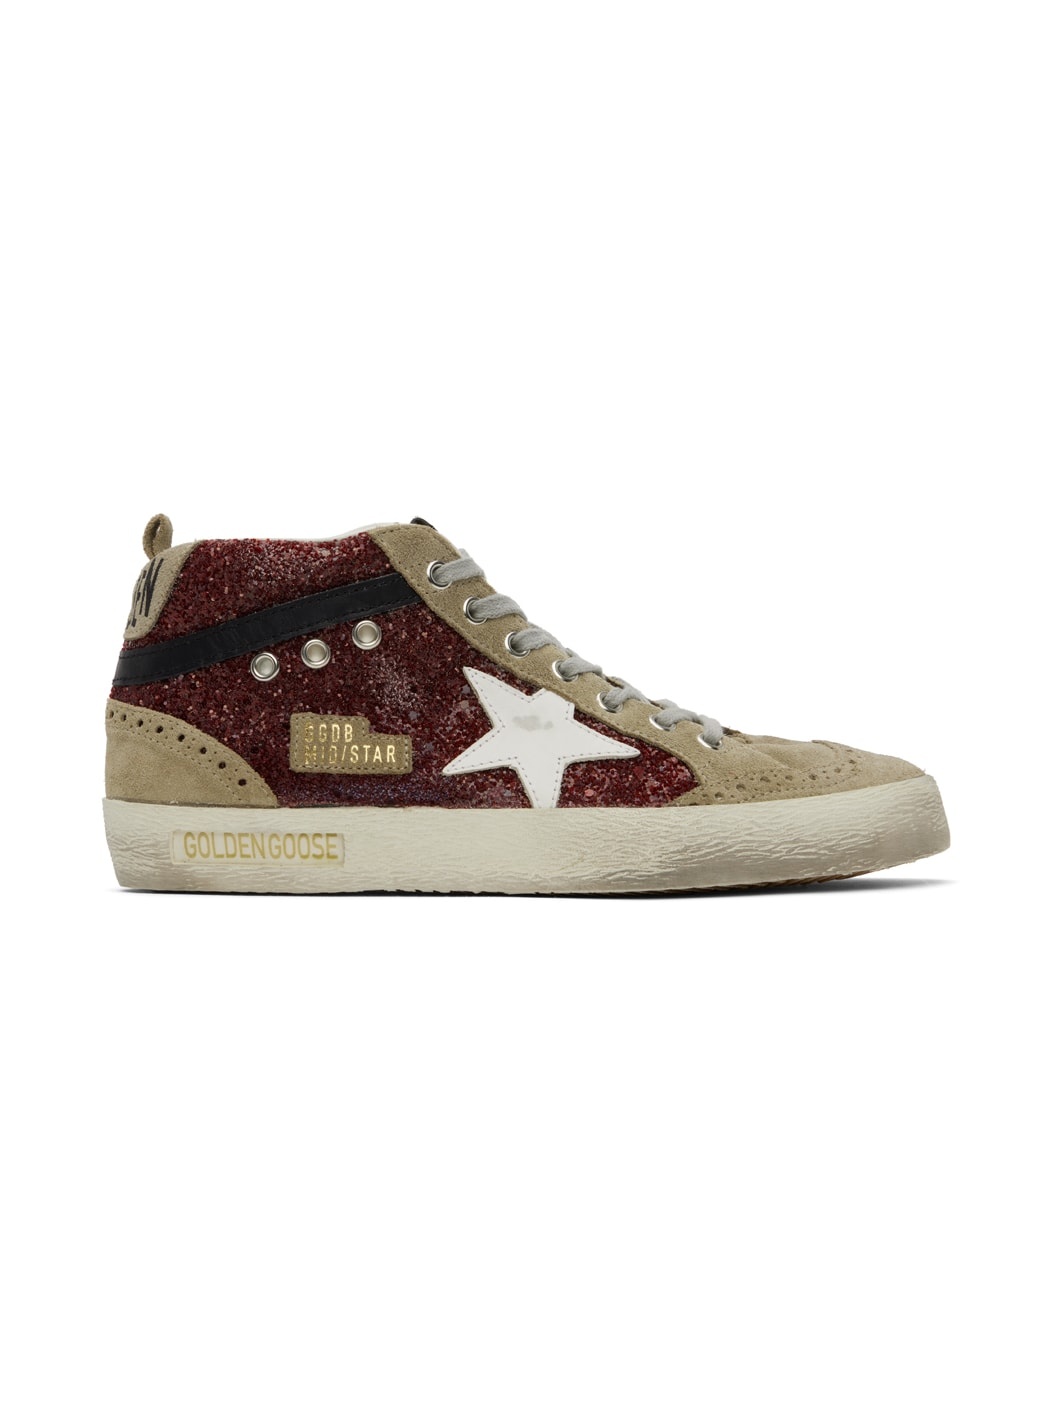 Taupe & Burgundy Mid Star Sneakers - 1